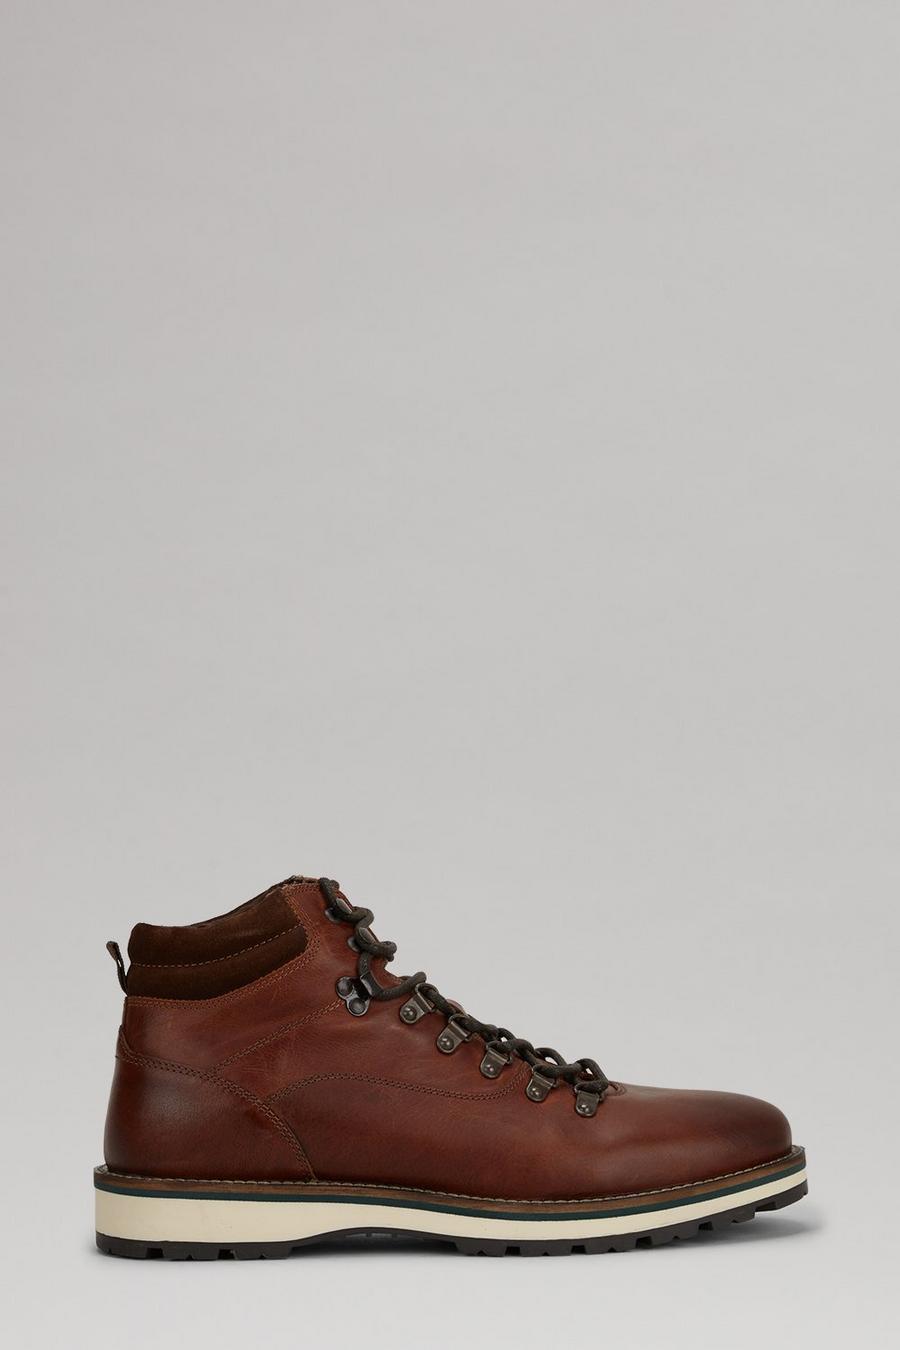 Brown Leather Hiking Boots